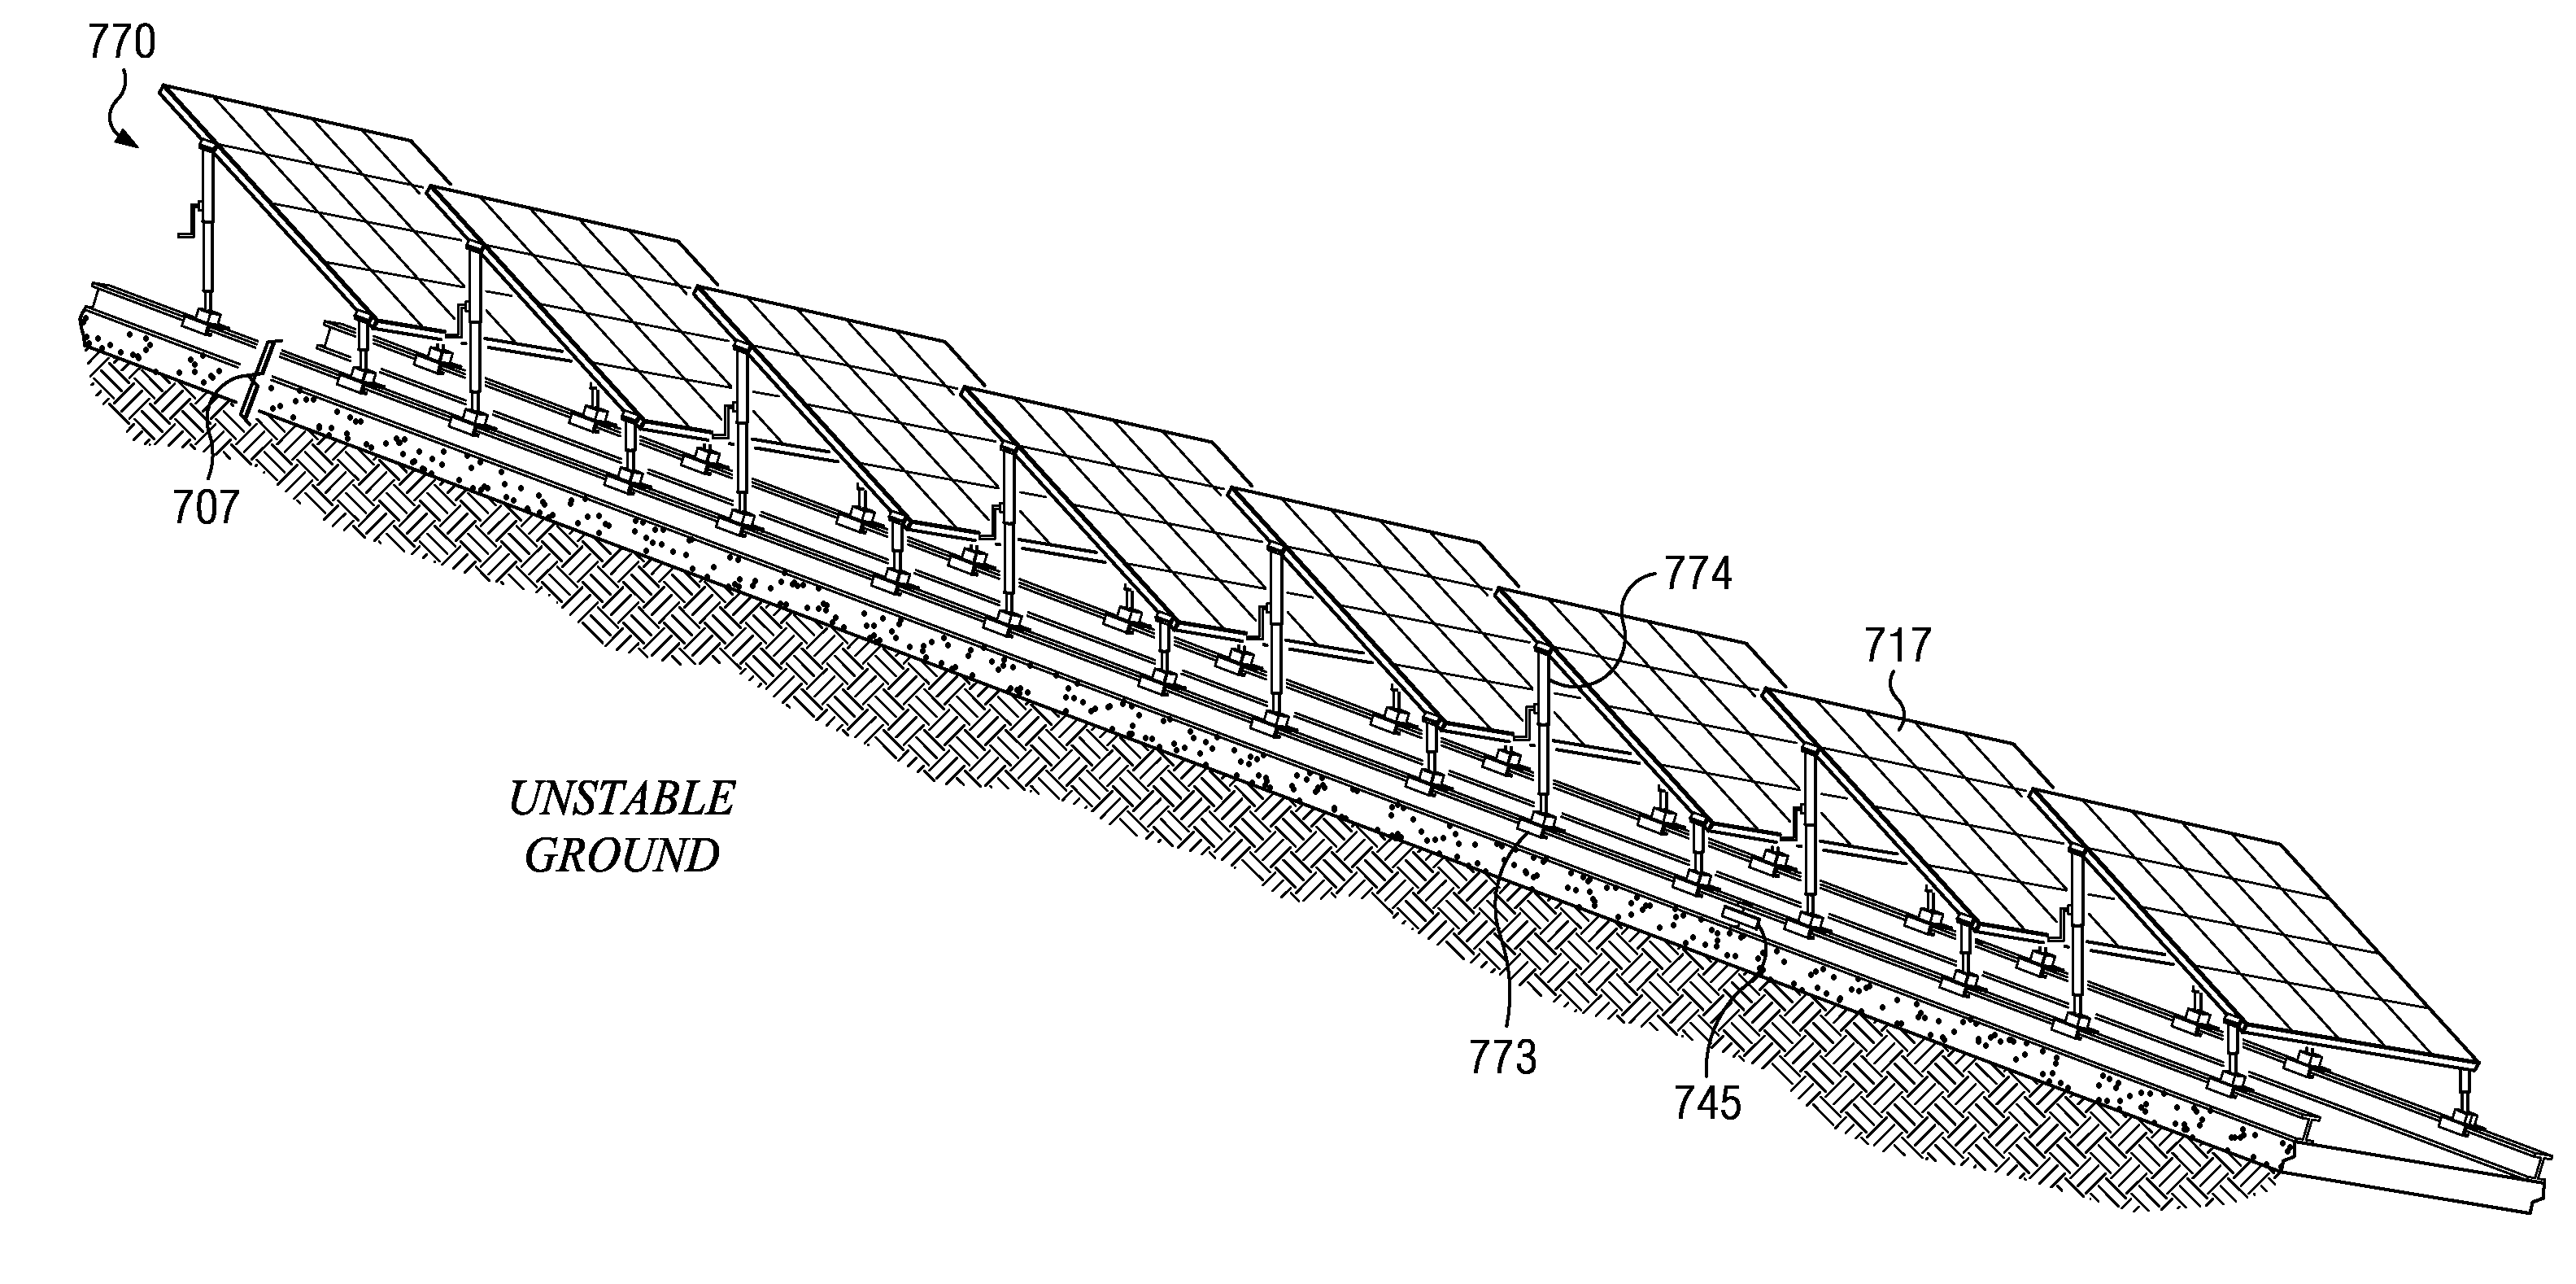 Segmented ballast base support structure and rail and trolley structures for unstable ground